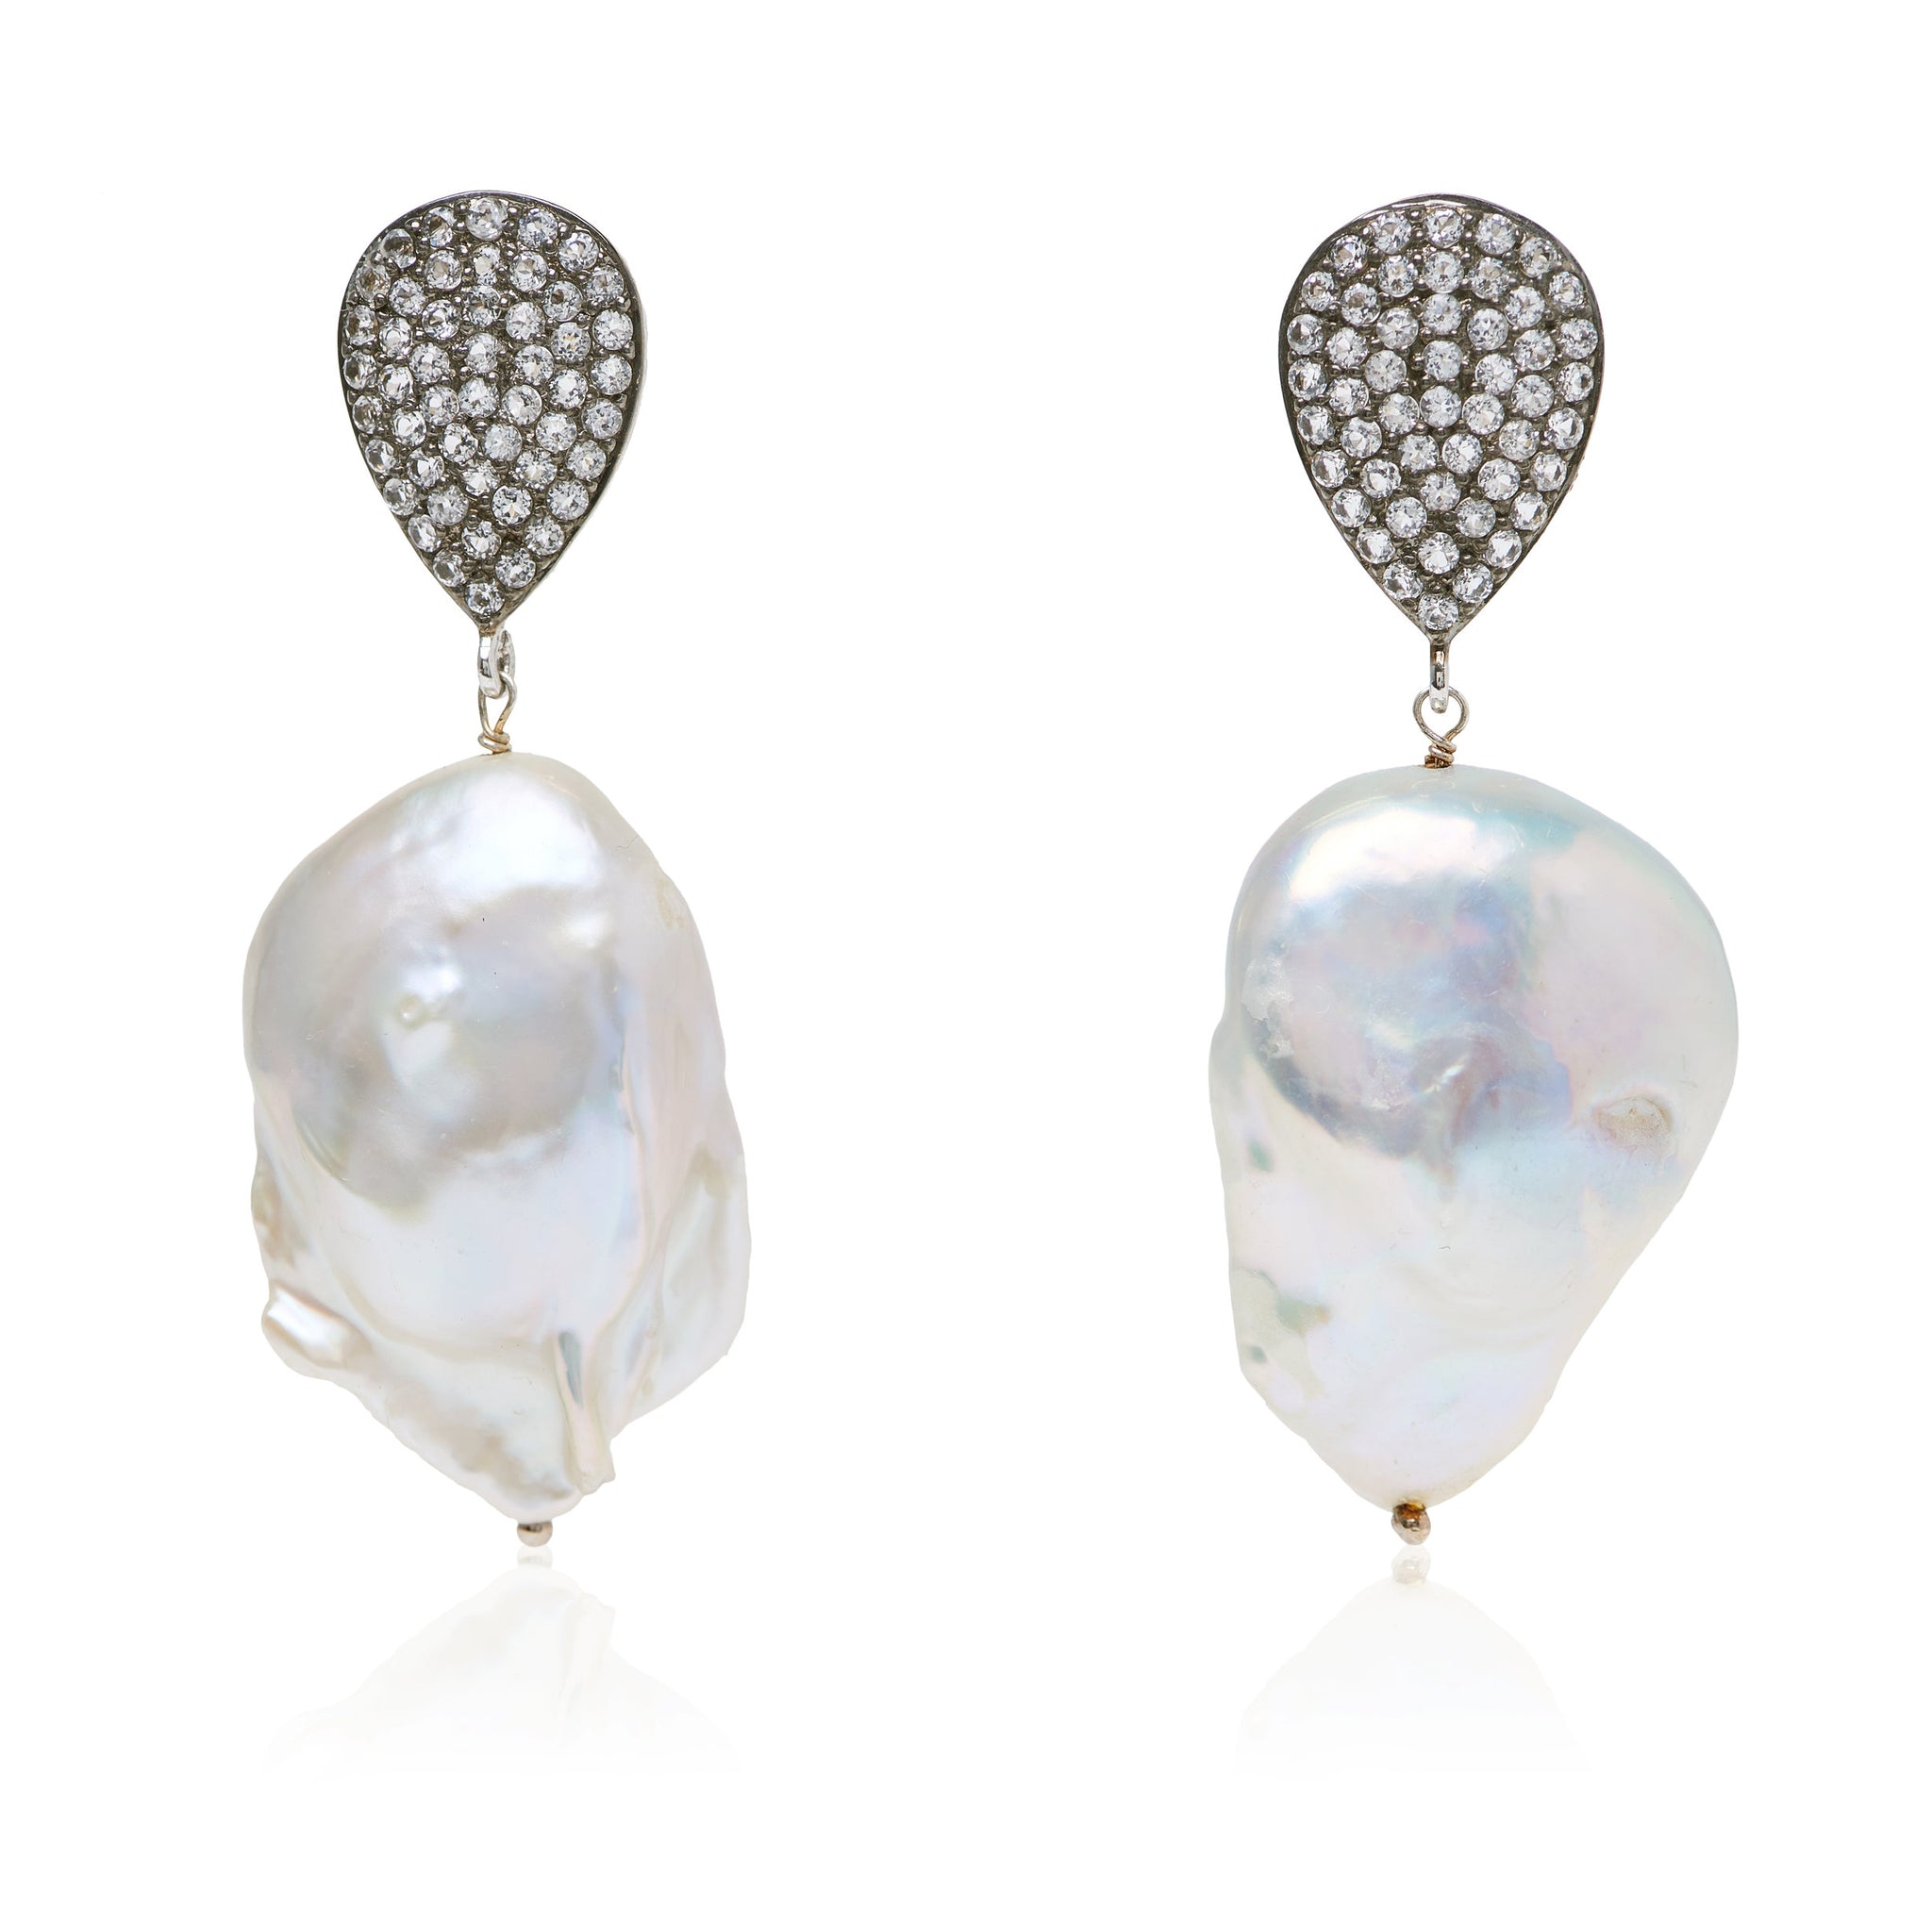 White Topaz and Baroque Pearl Earrings in Sterling Silver